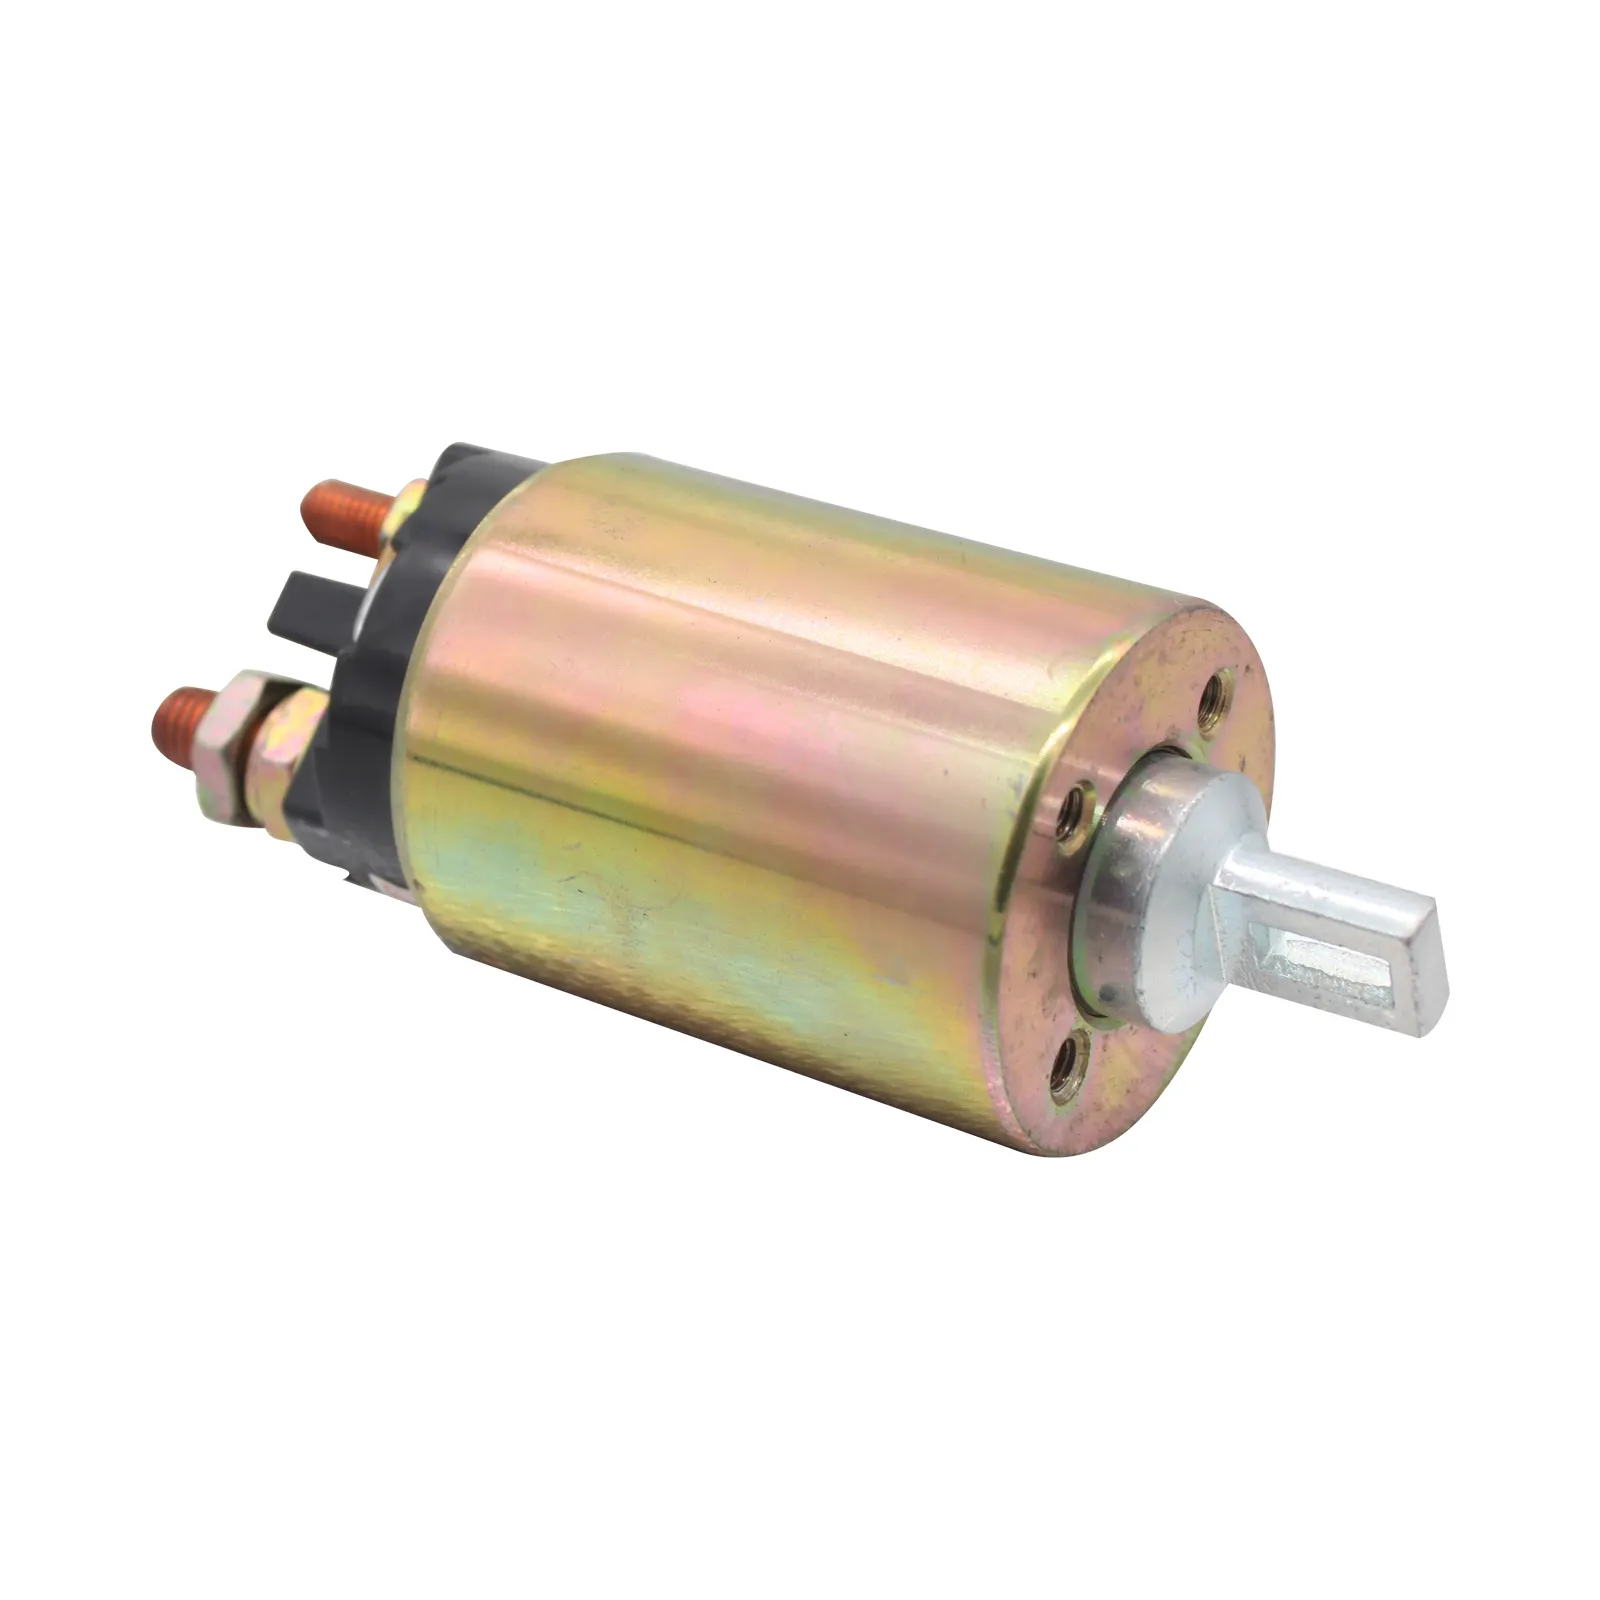 Brand New Car Starter Accessories Copper For Mitsubishi 12v Starter Solenoid Switch M372X06171 SS-1503